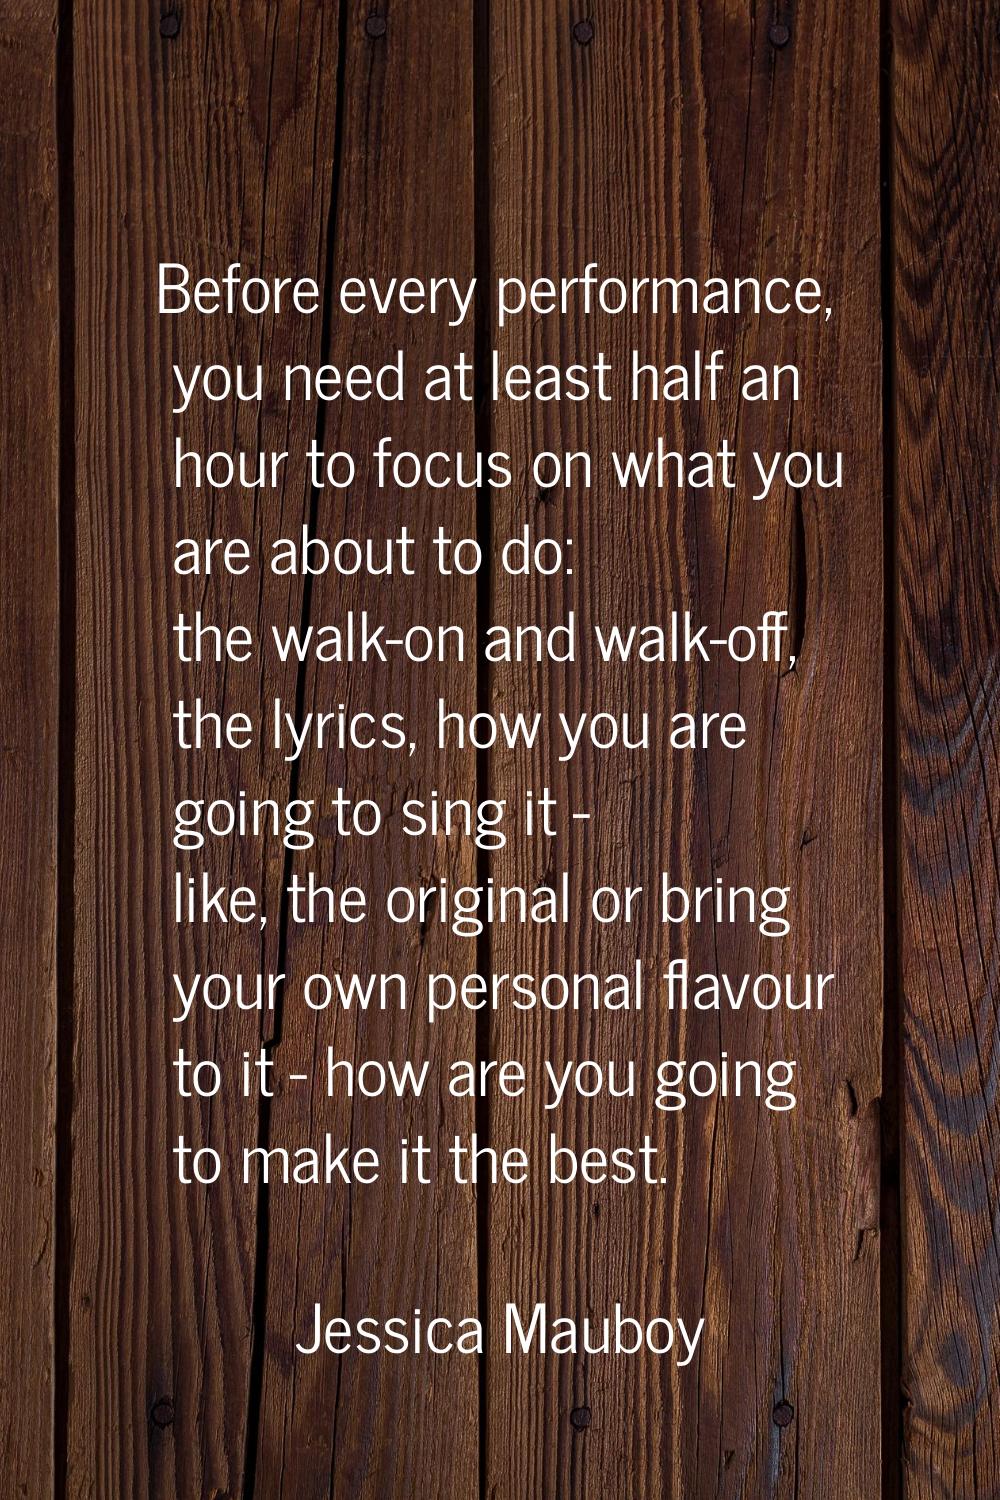 Before every performance, you need at least half an hour to focus on what you are about to do: the 